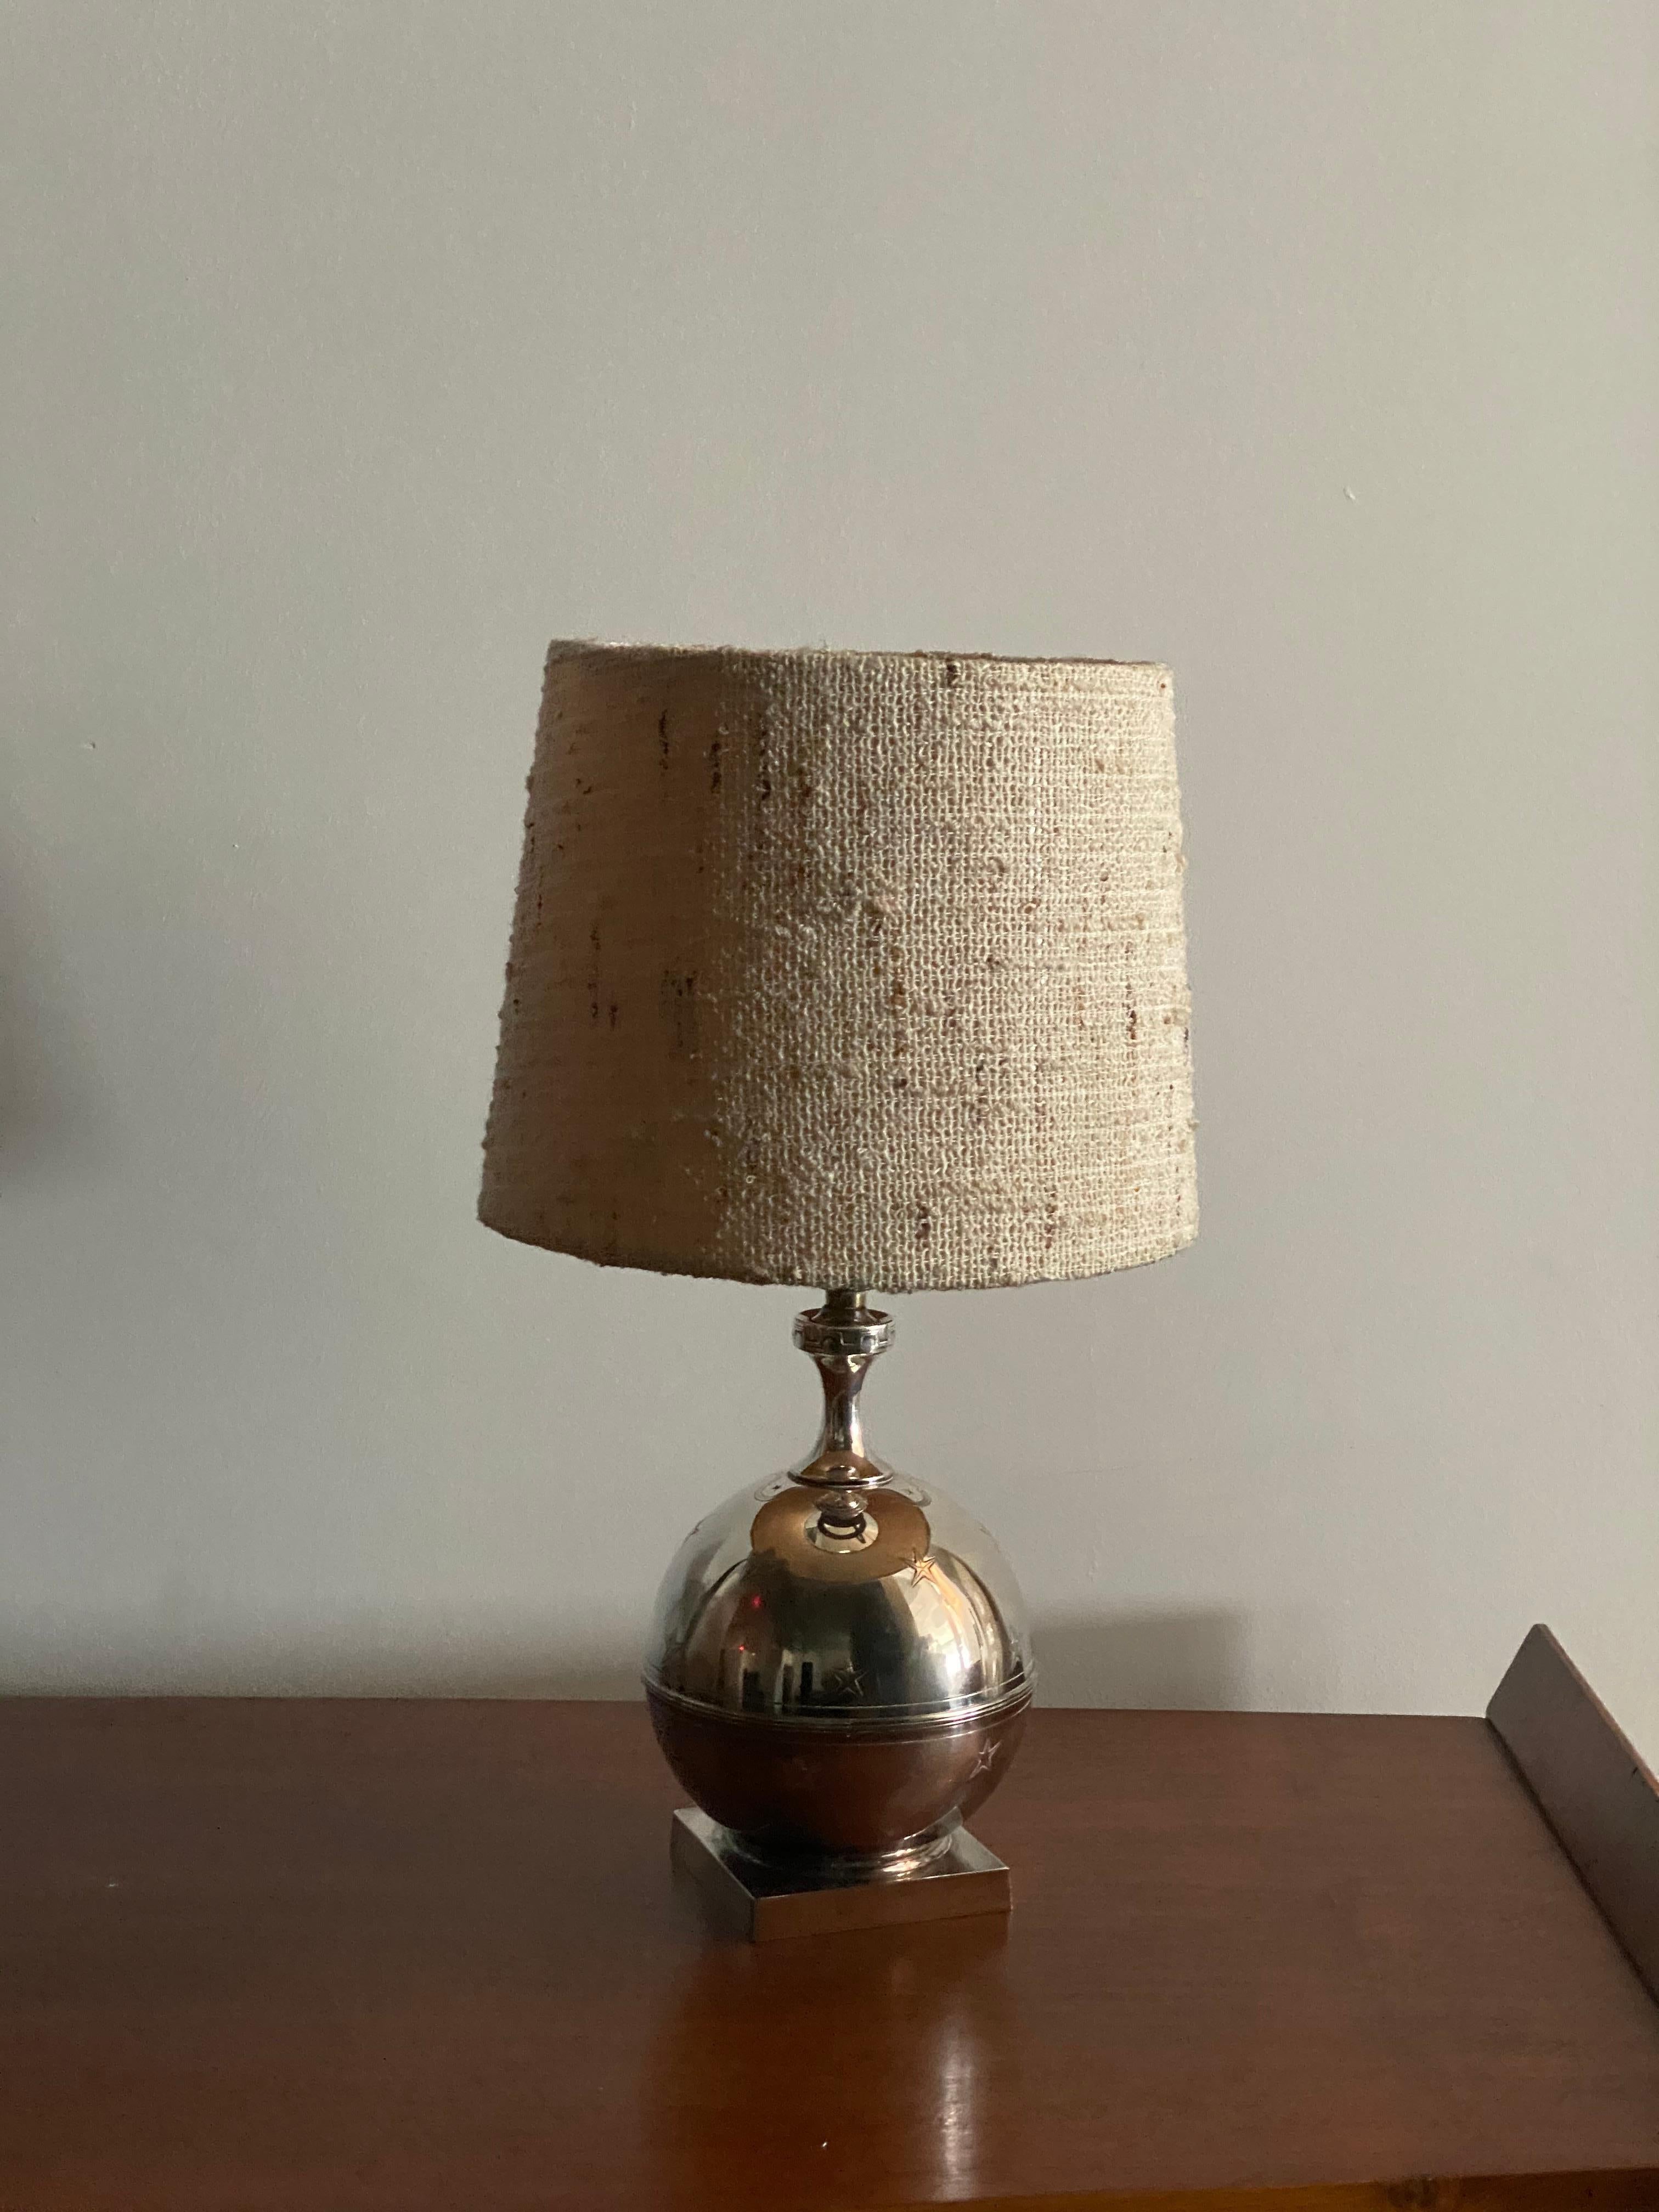 A table lamp by GAB. Executed in finely ornamented pewter, stamped with makers mark, Sweden, 1930s.

GAB is short for Guldsmedsaktiebolaget, which translates roughly to 